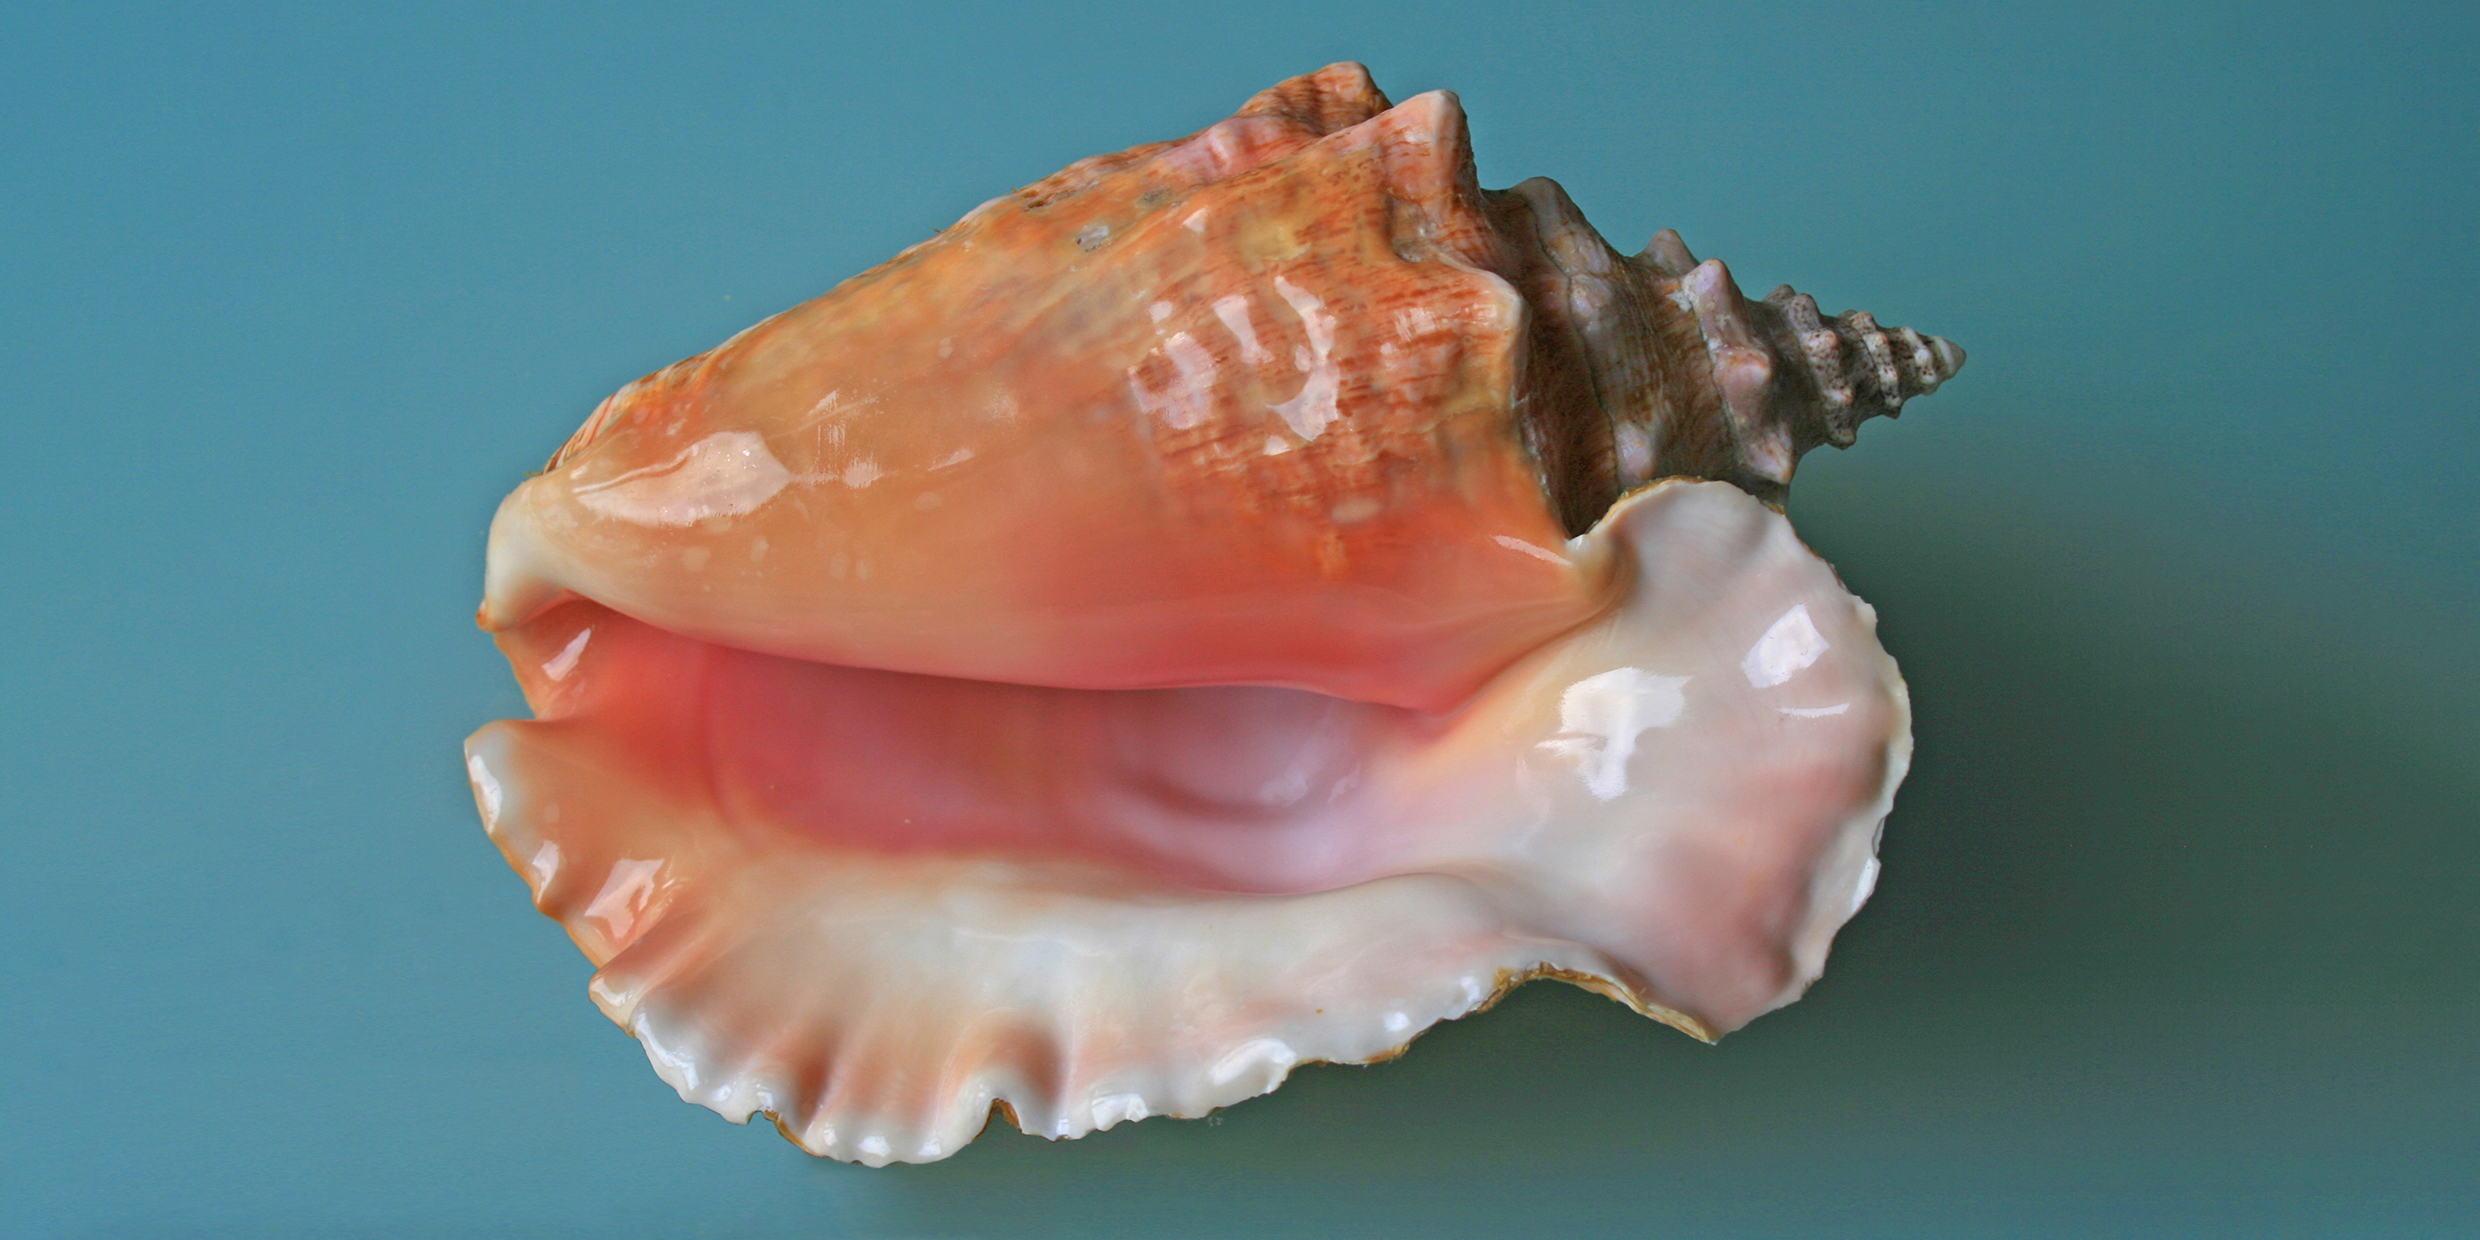 Image of a large conch shell